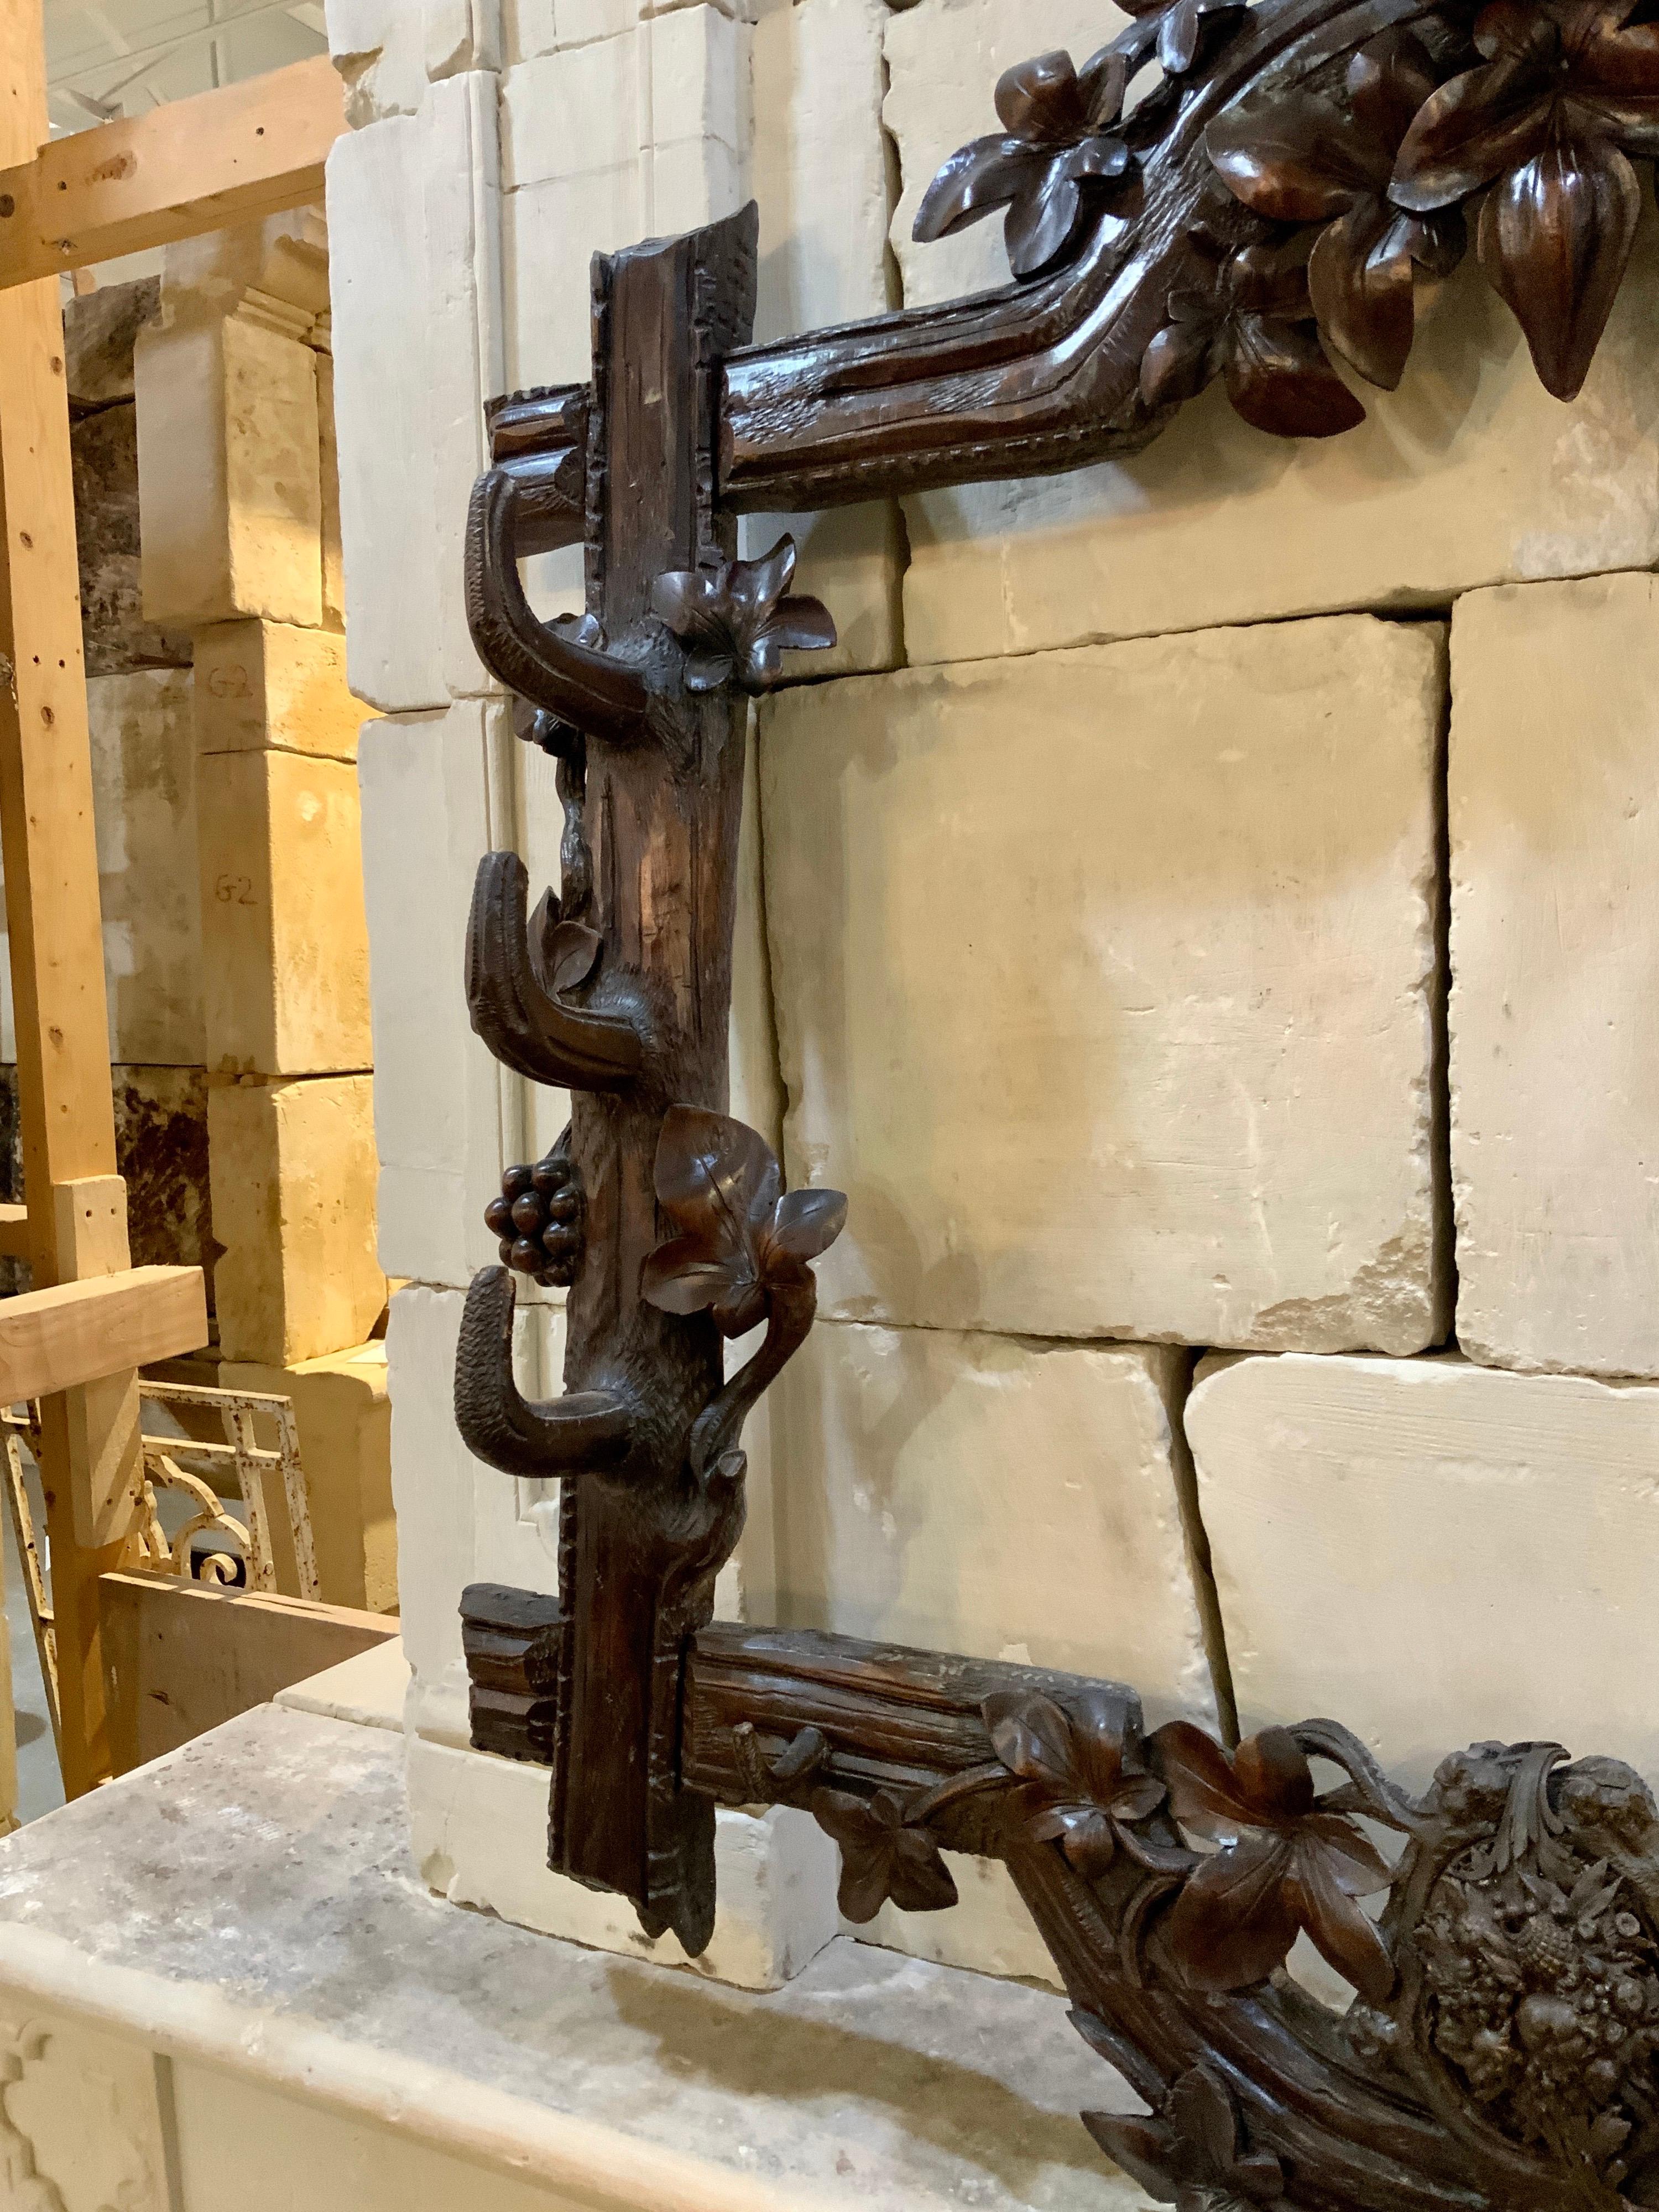 19th Century Mid-19th Black Forest Gun Rack from France